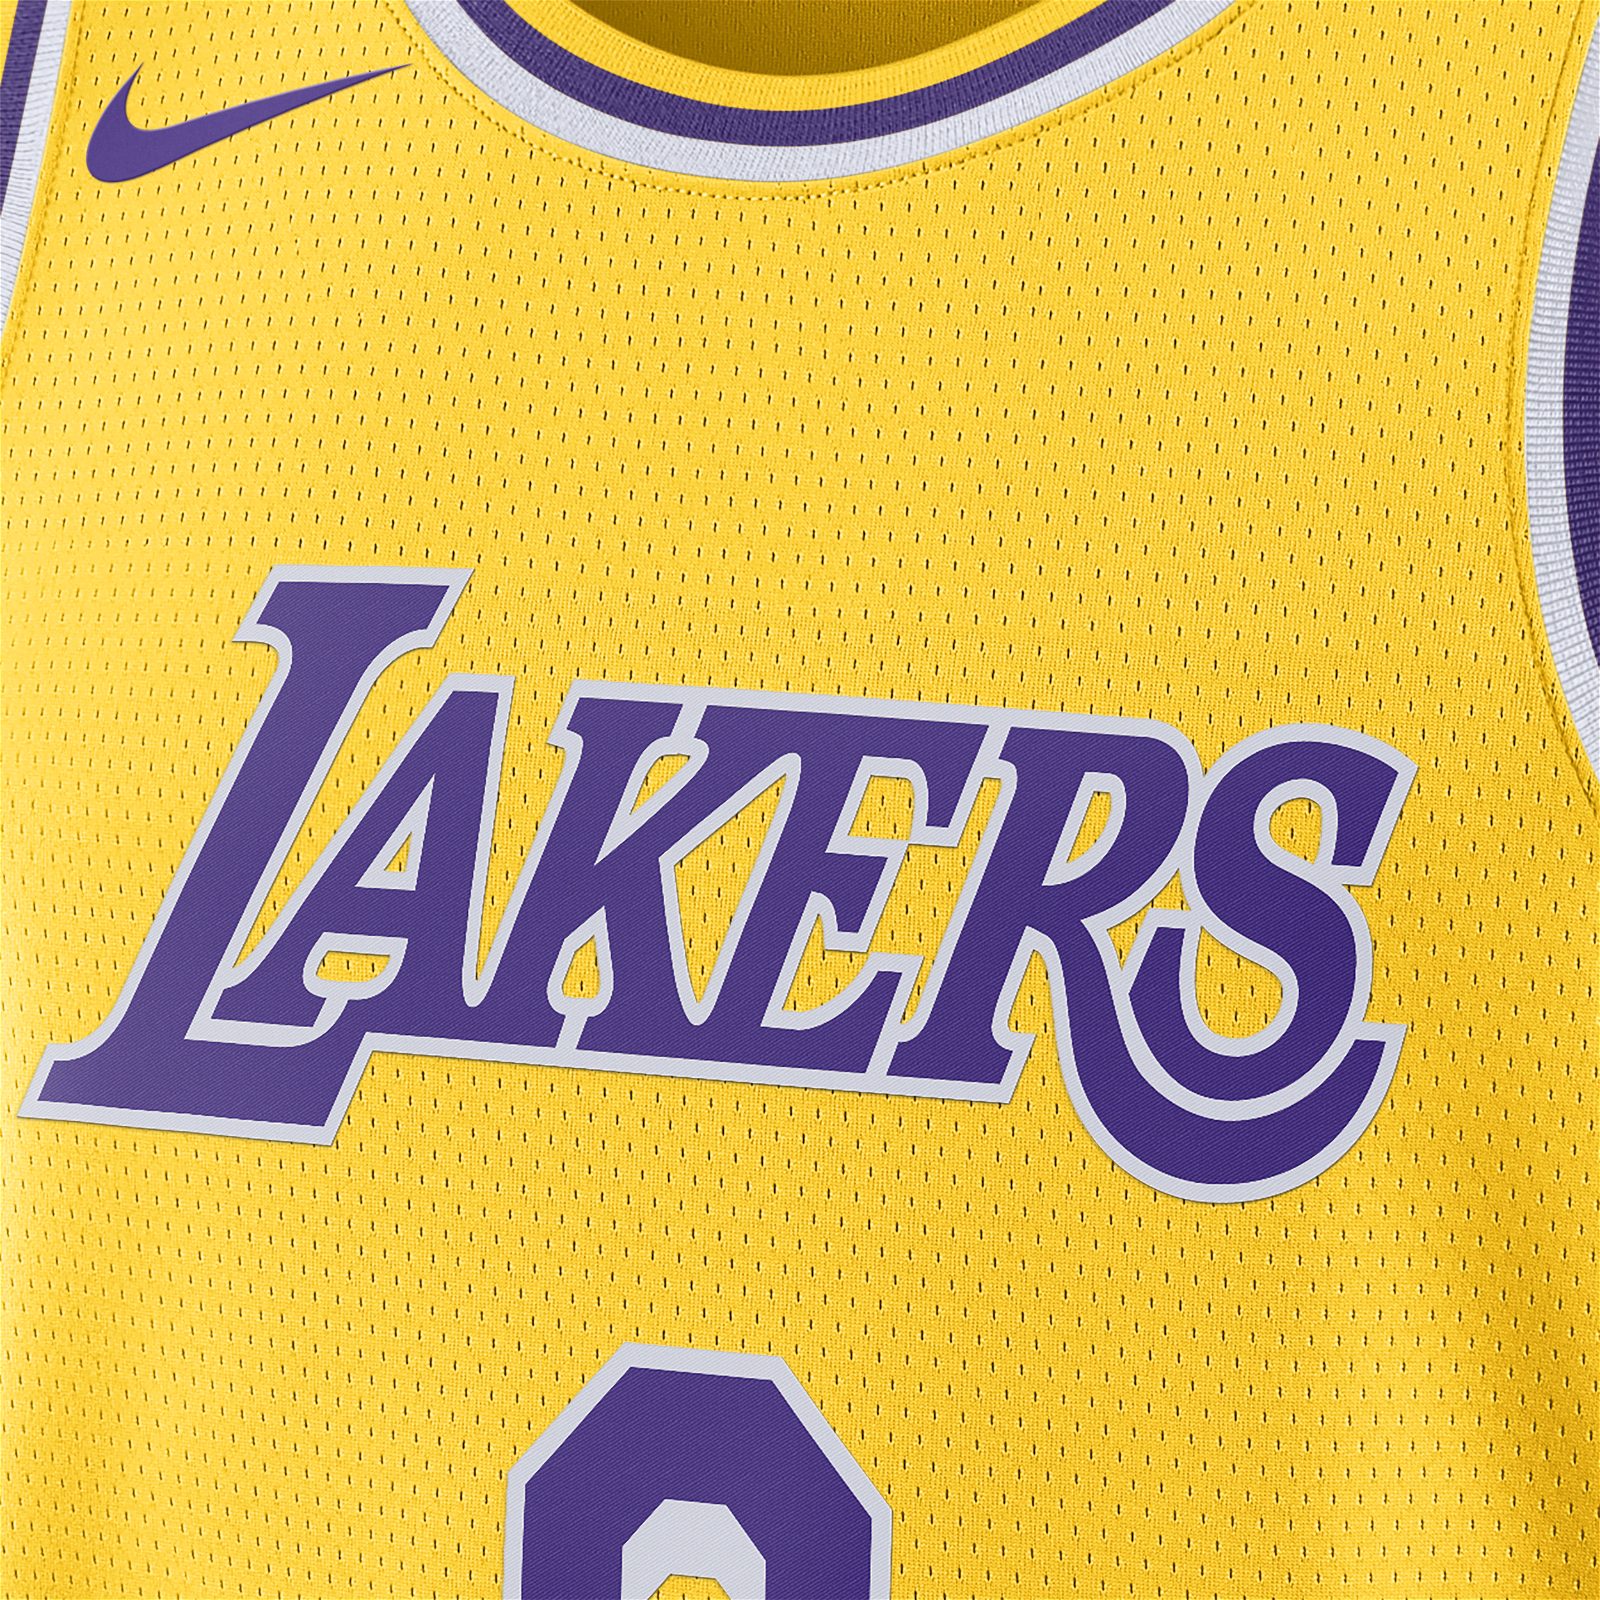 Los Angeles Lakers Icon Edition 2022/23  Dri-FIT Jersey